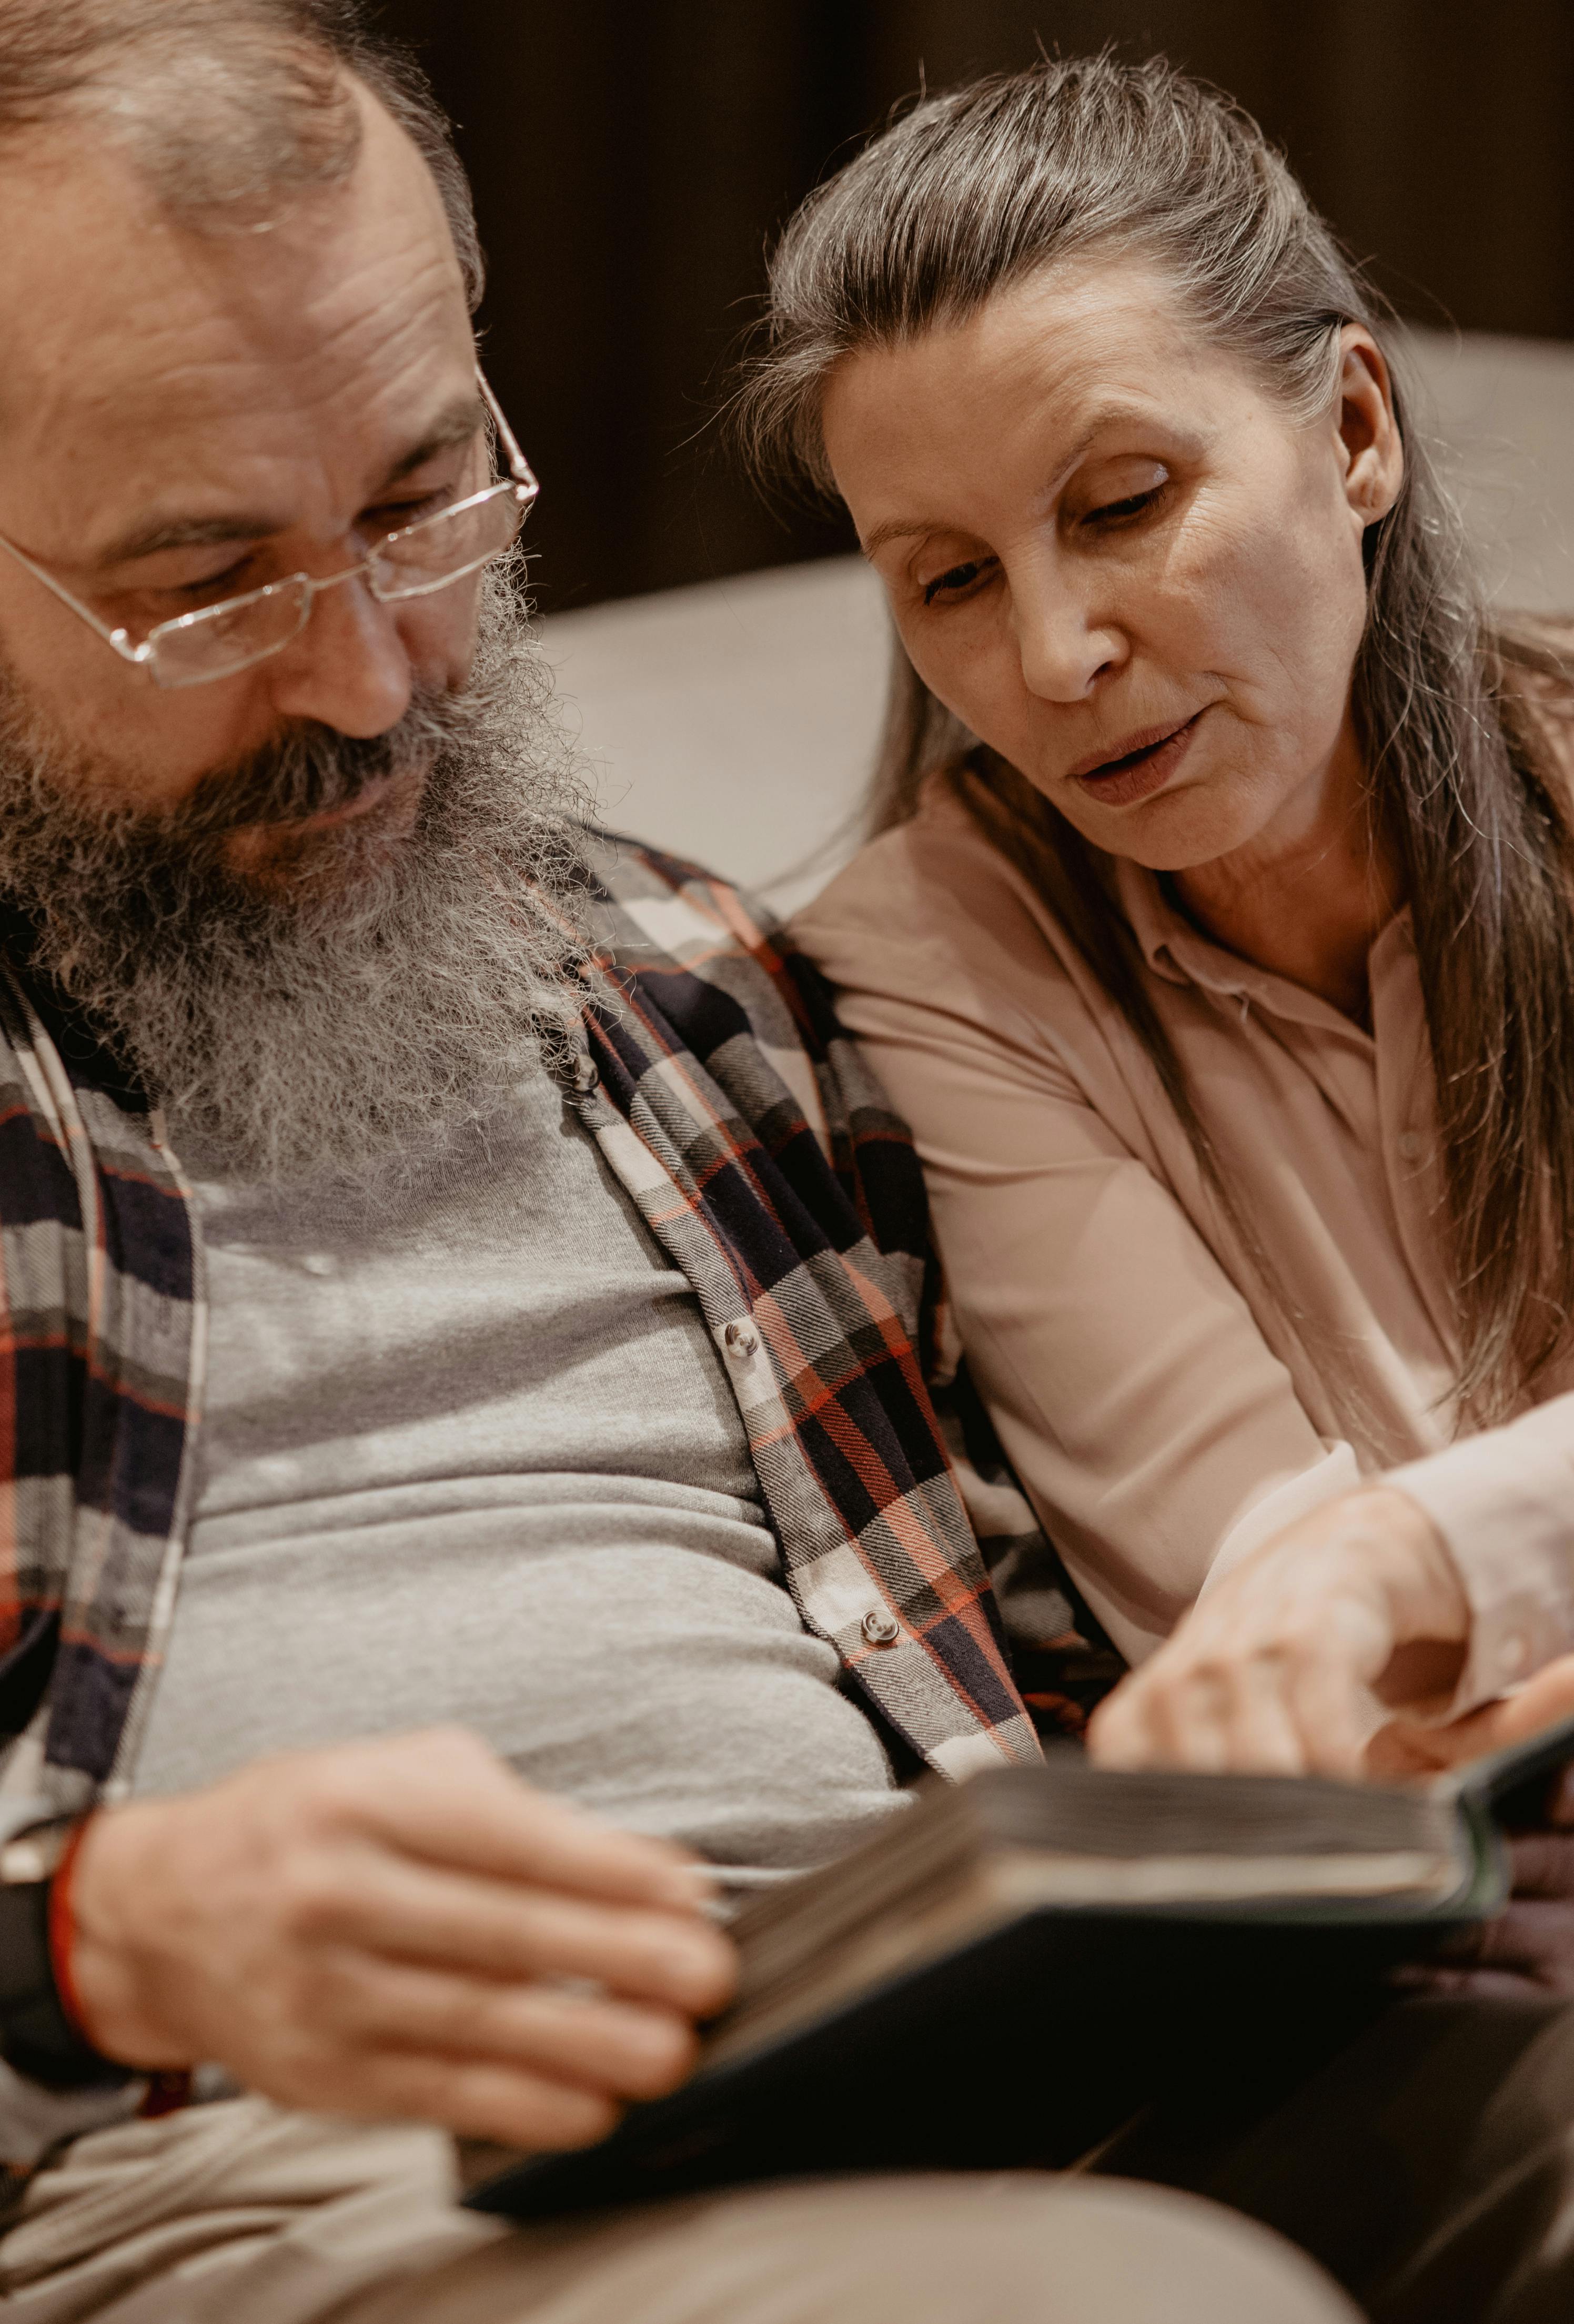 An older couple at home | Source: Pexels